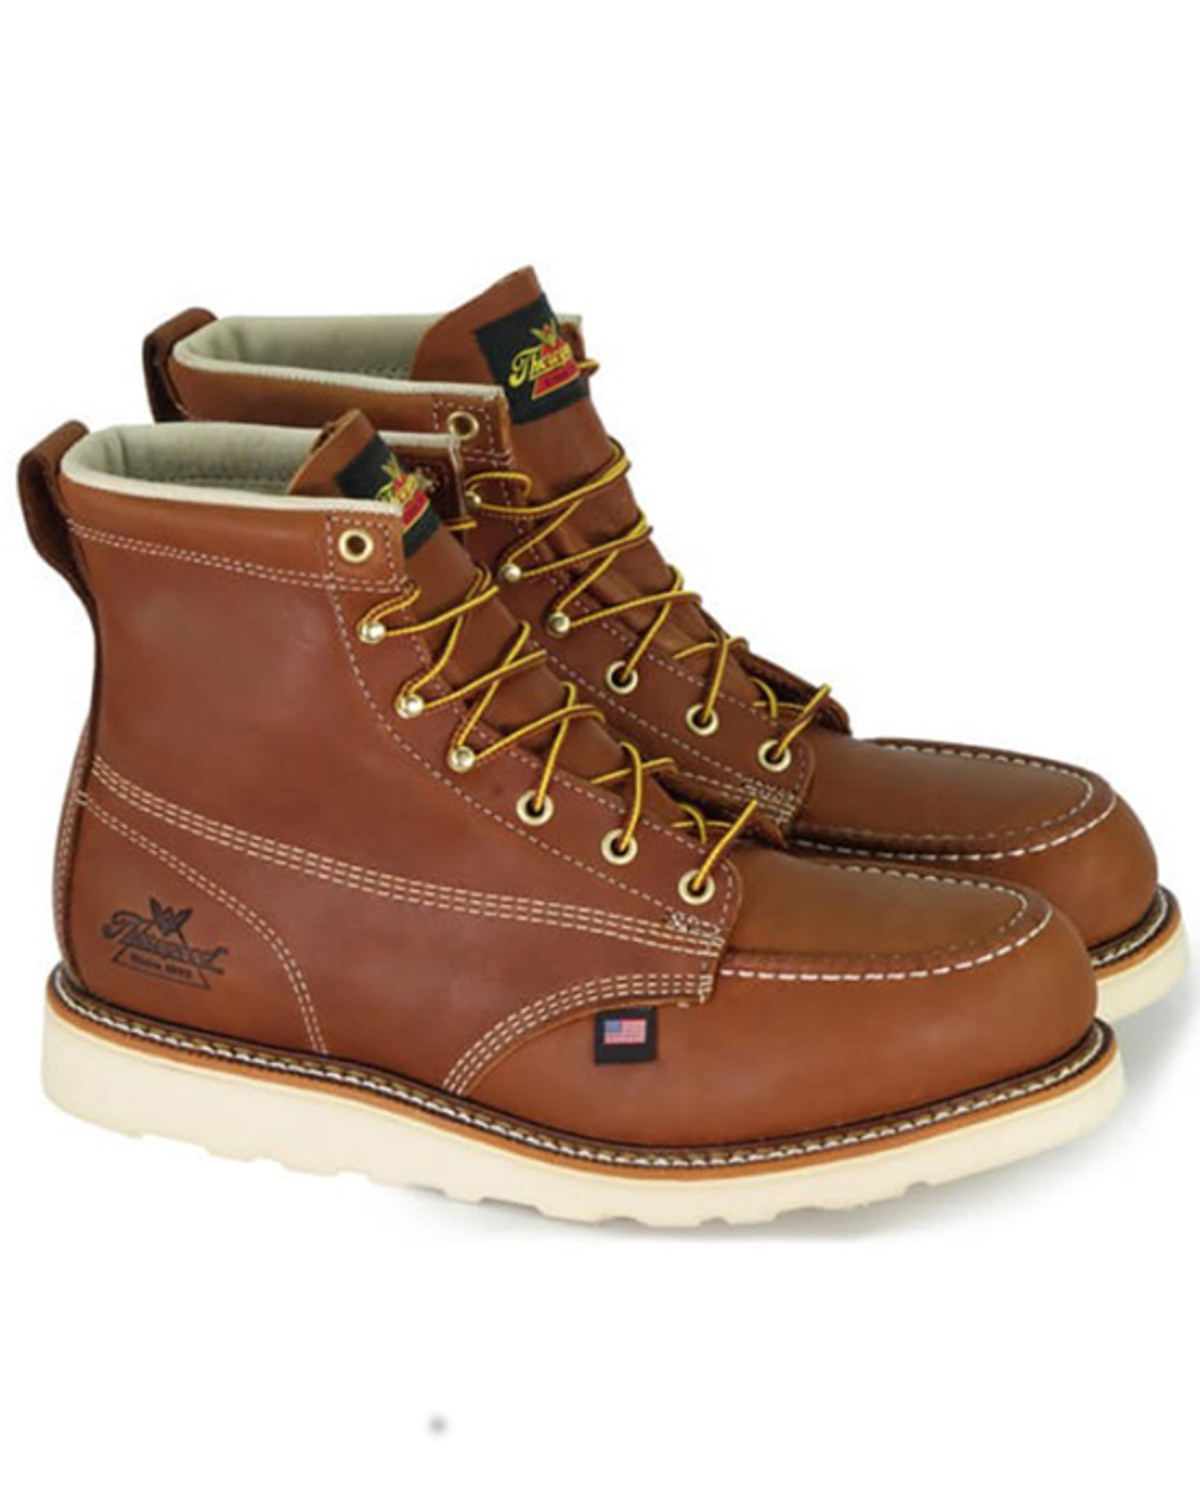 Thorogood Men's 6" Moc Safety Toe Lace-Up Work Boots